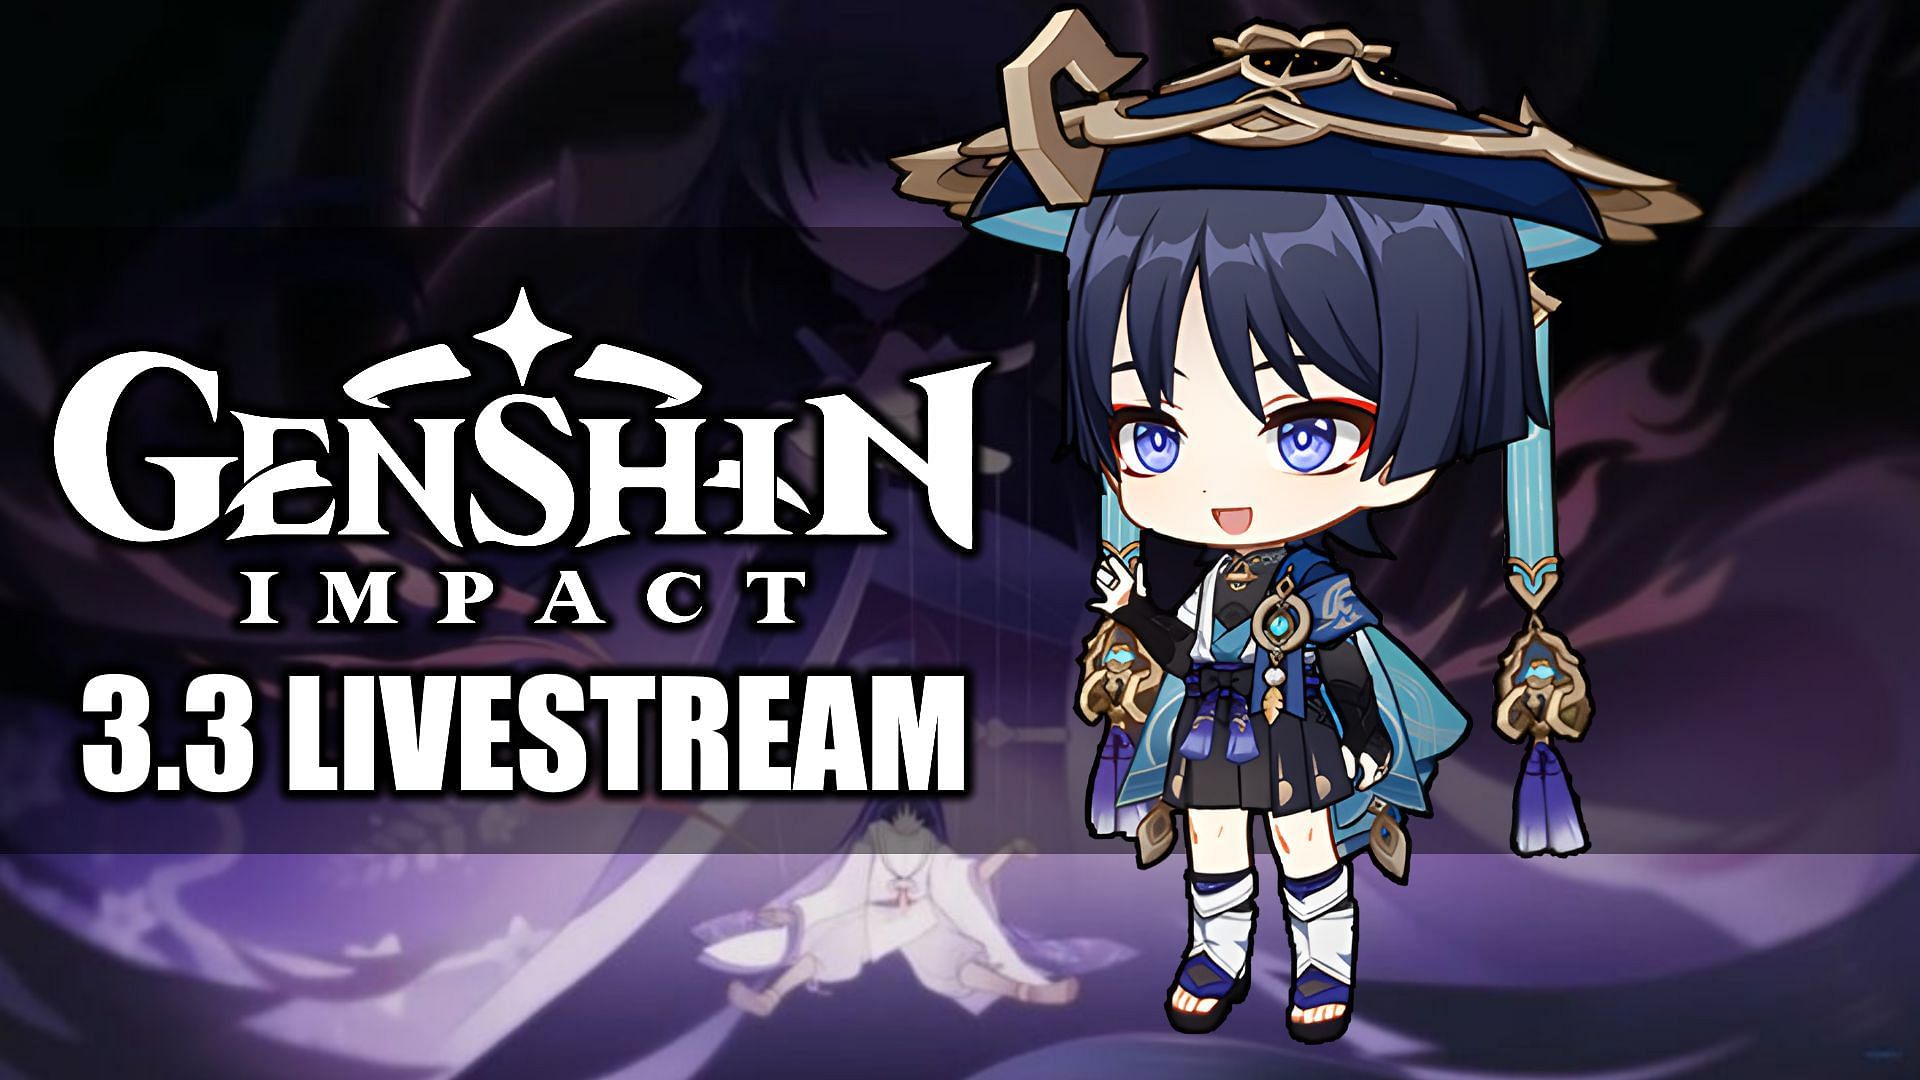 Genshin Impact 3.3 livestream: Redeem Codes, new characters, and more  expected announcements